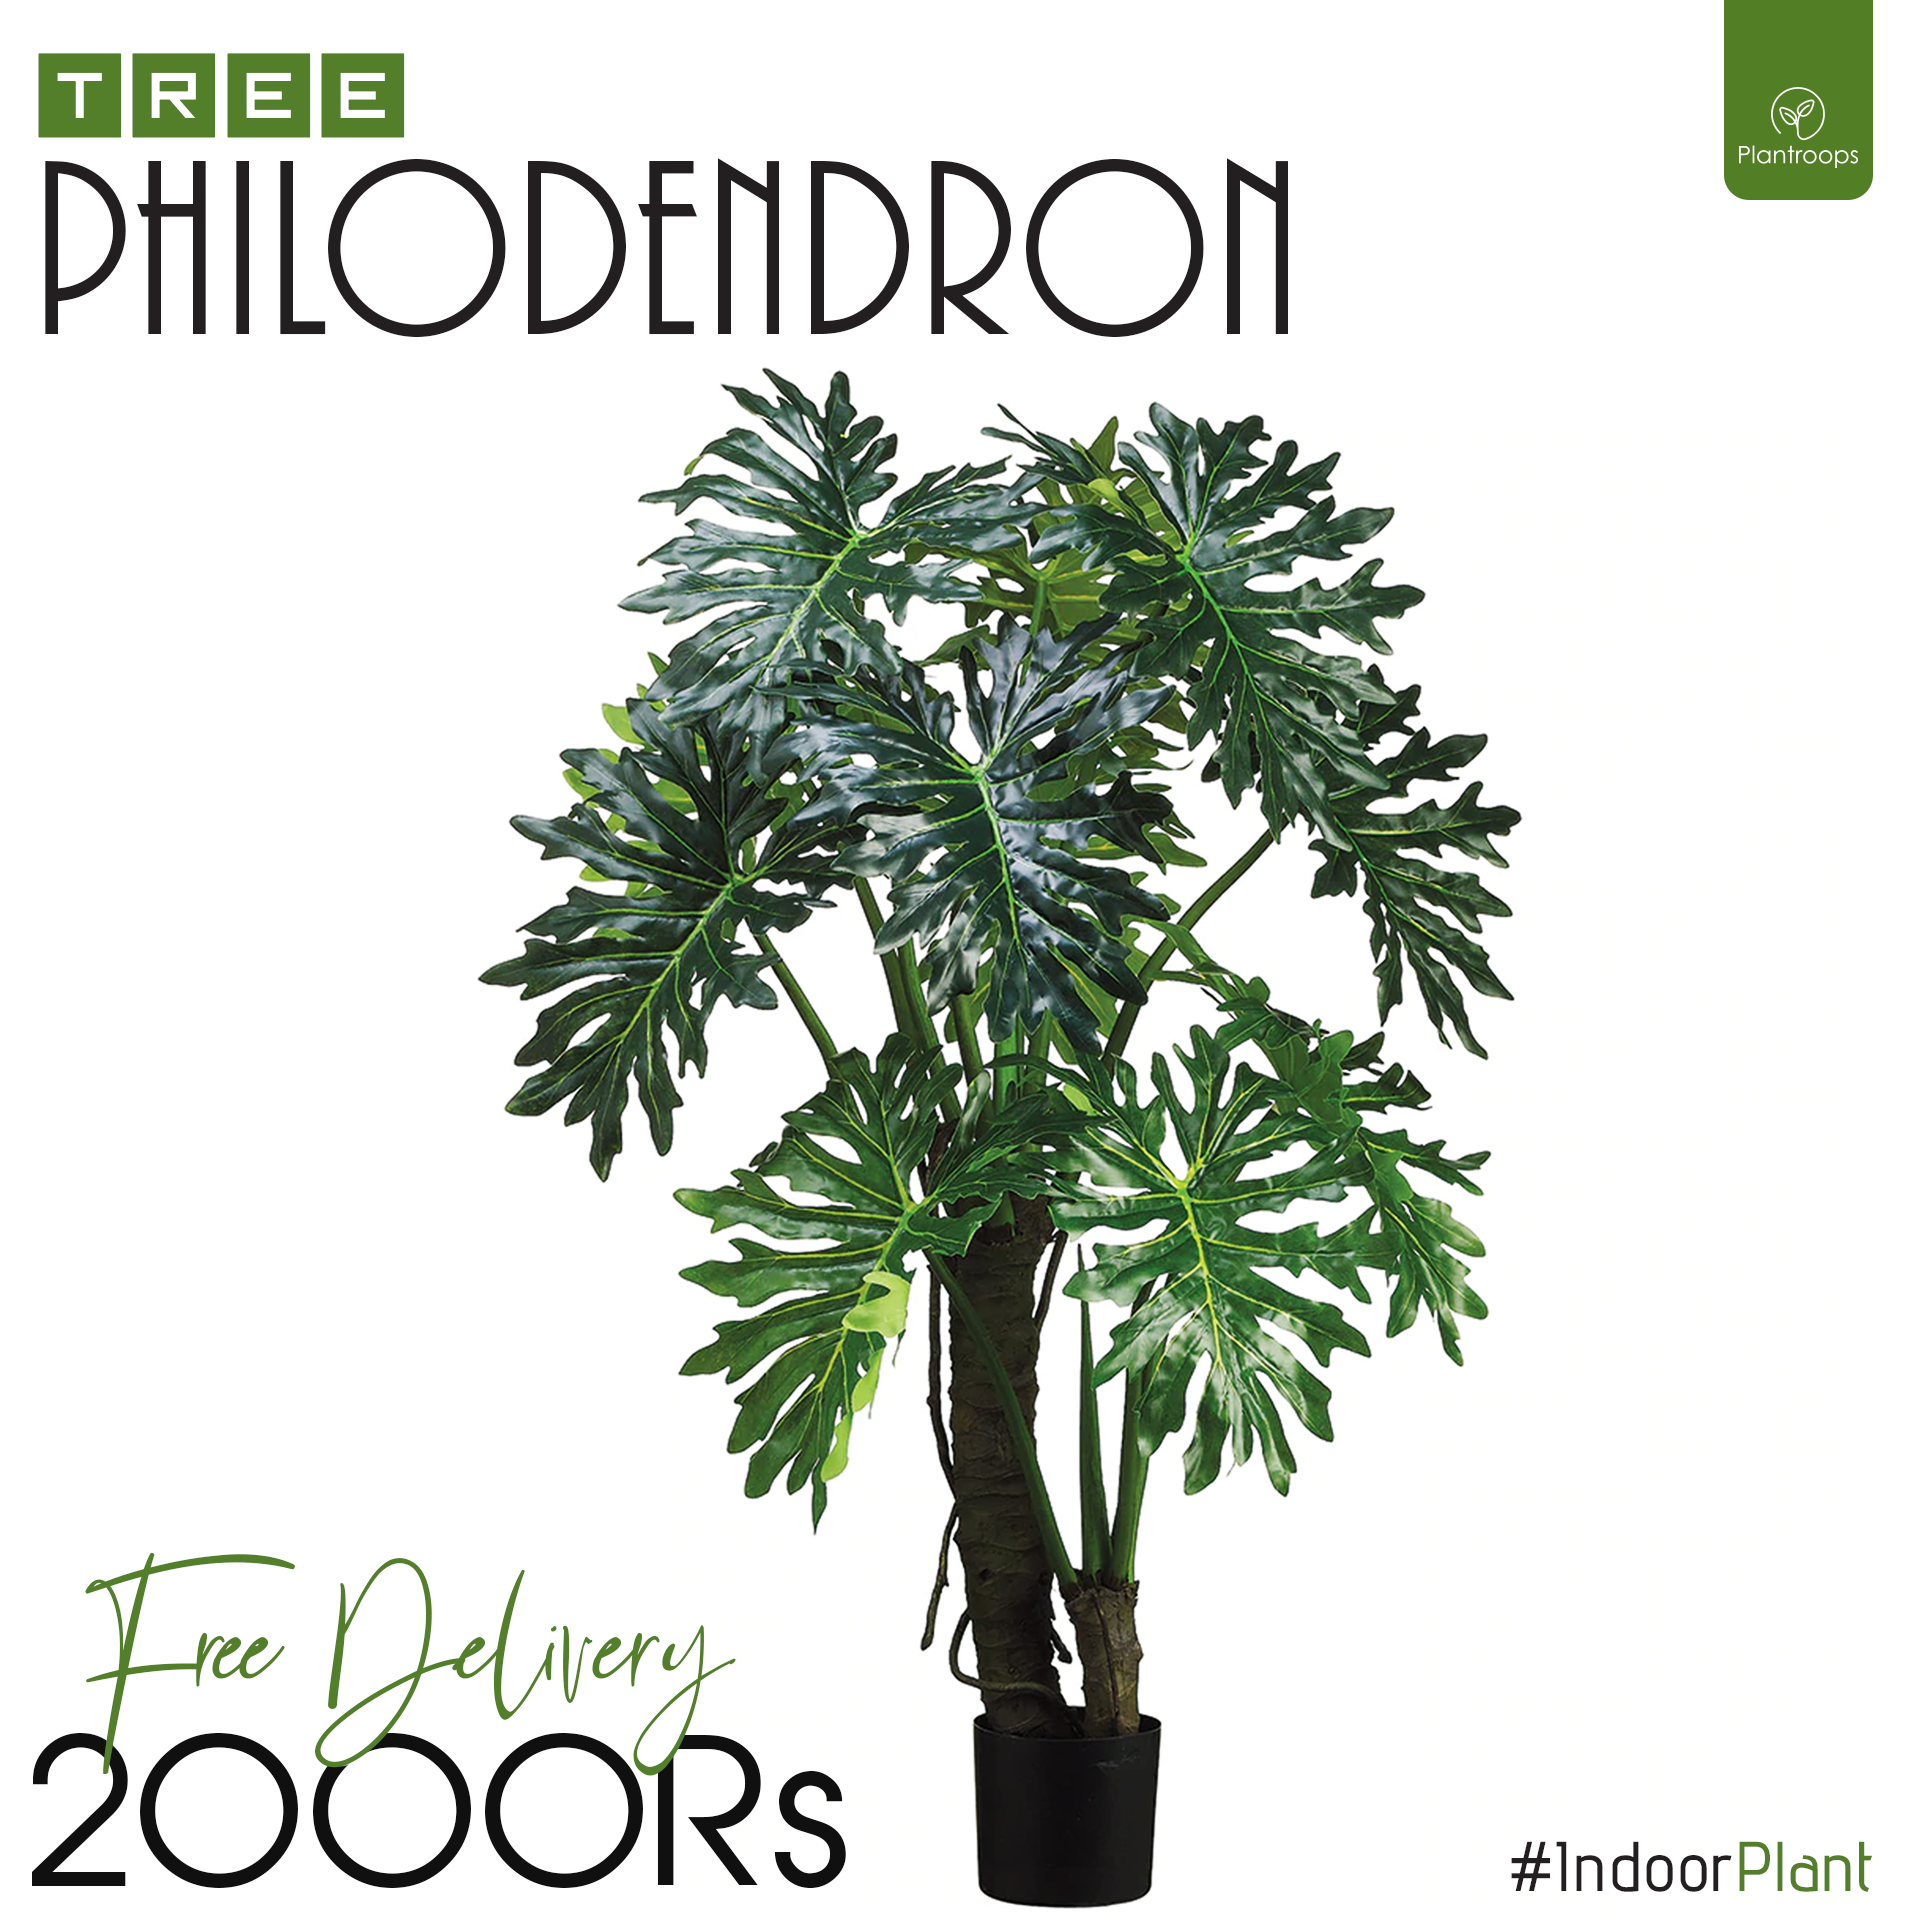 TREE PHILODENDRON